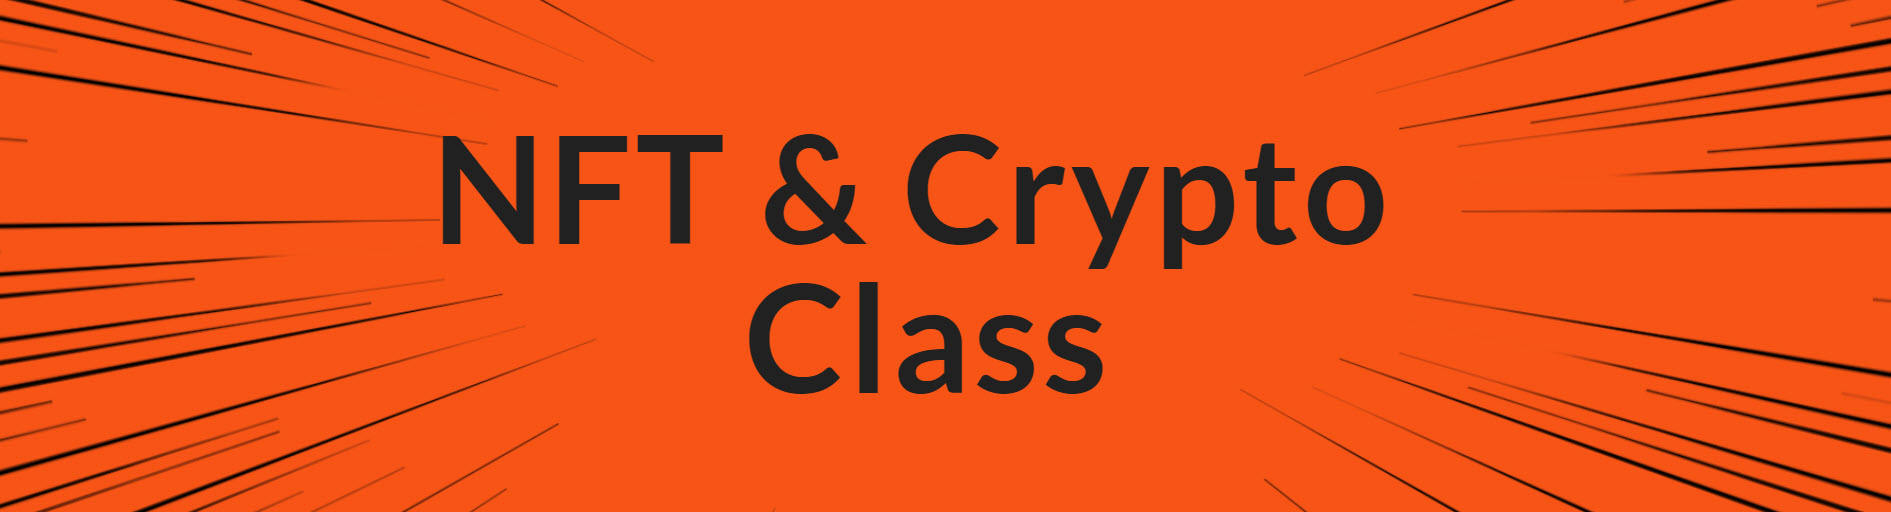 NFT & Crypto Class – Students Only